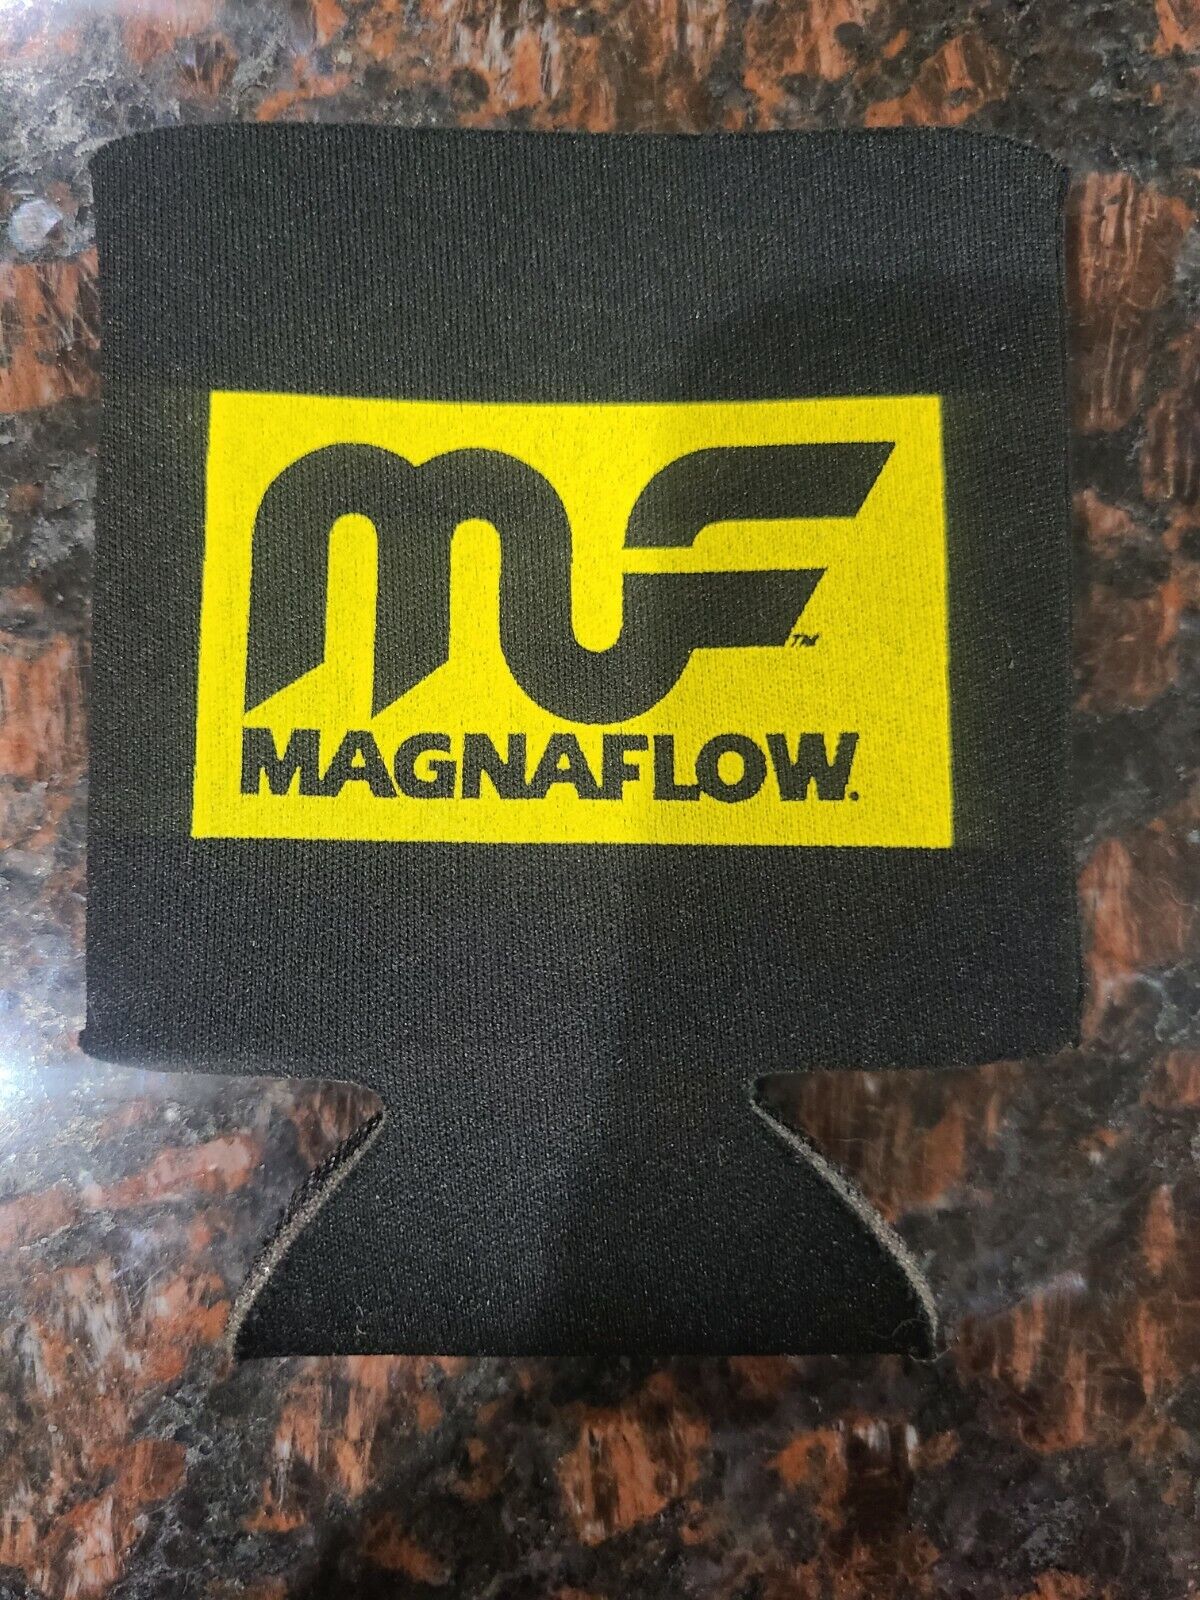 NEW Magnaflow Exhaust & Borg Warner Turbo Systems Can Koozies